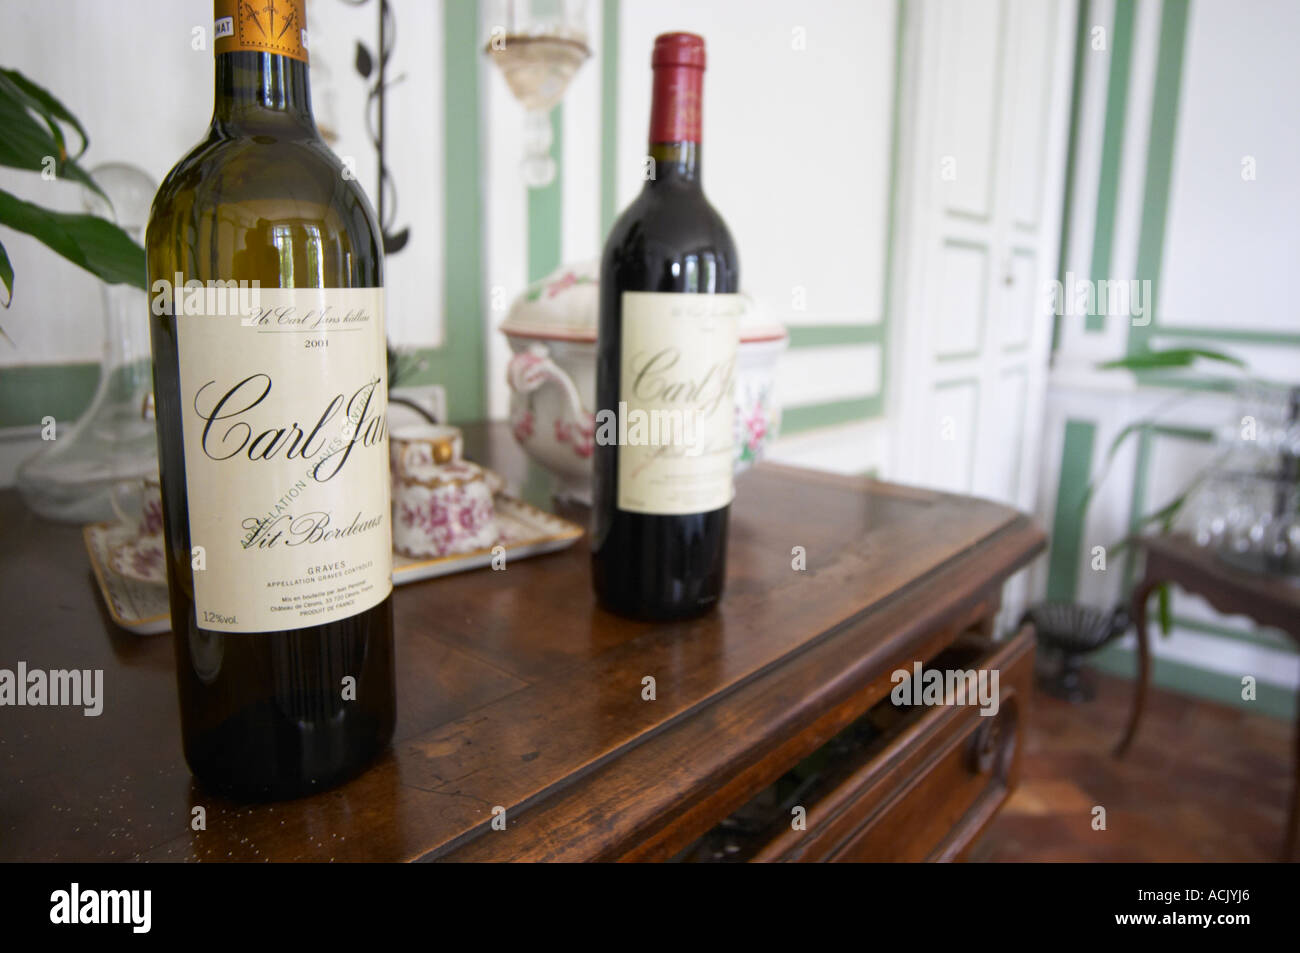 Two bottles of white and red Bordeaux wine labelled Carl Jan Vit and Carl Jan Rod made by the Perromats for the Swedish market Chateau de Cerons (Cérons) Sauternes Gironde Aquitaine France Stock Photo